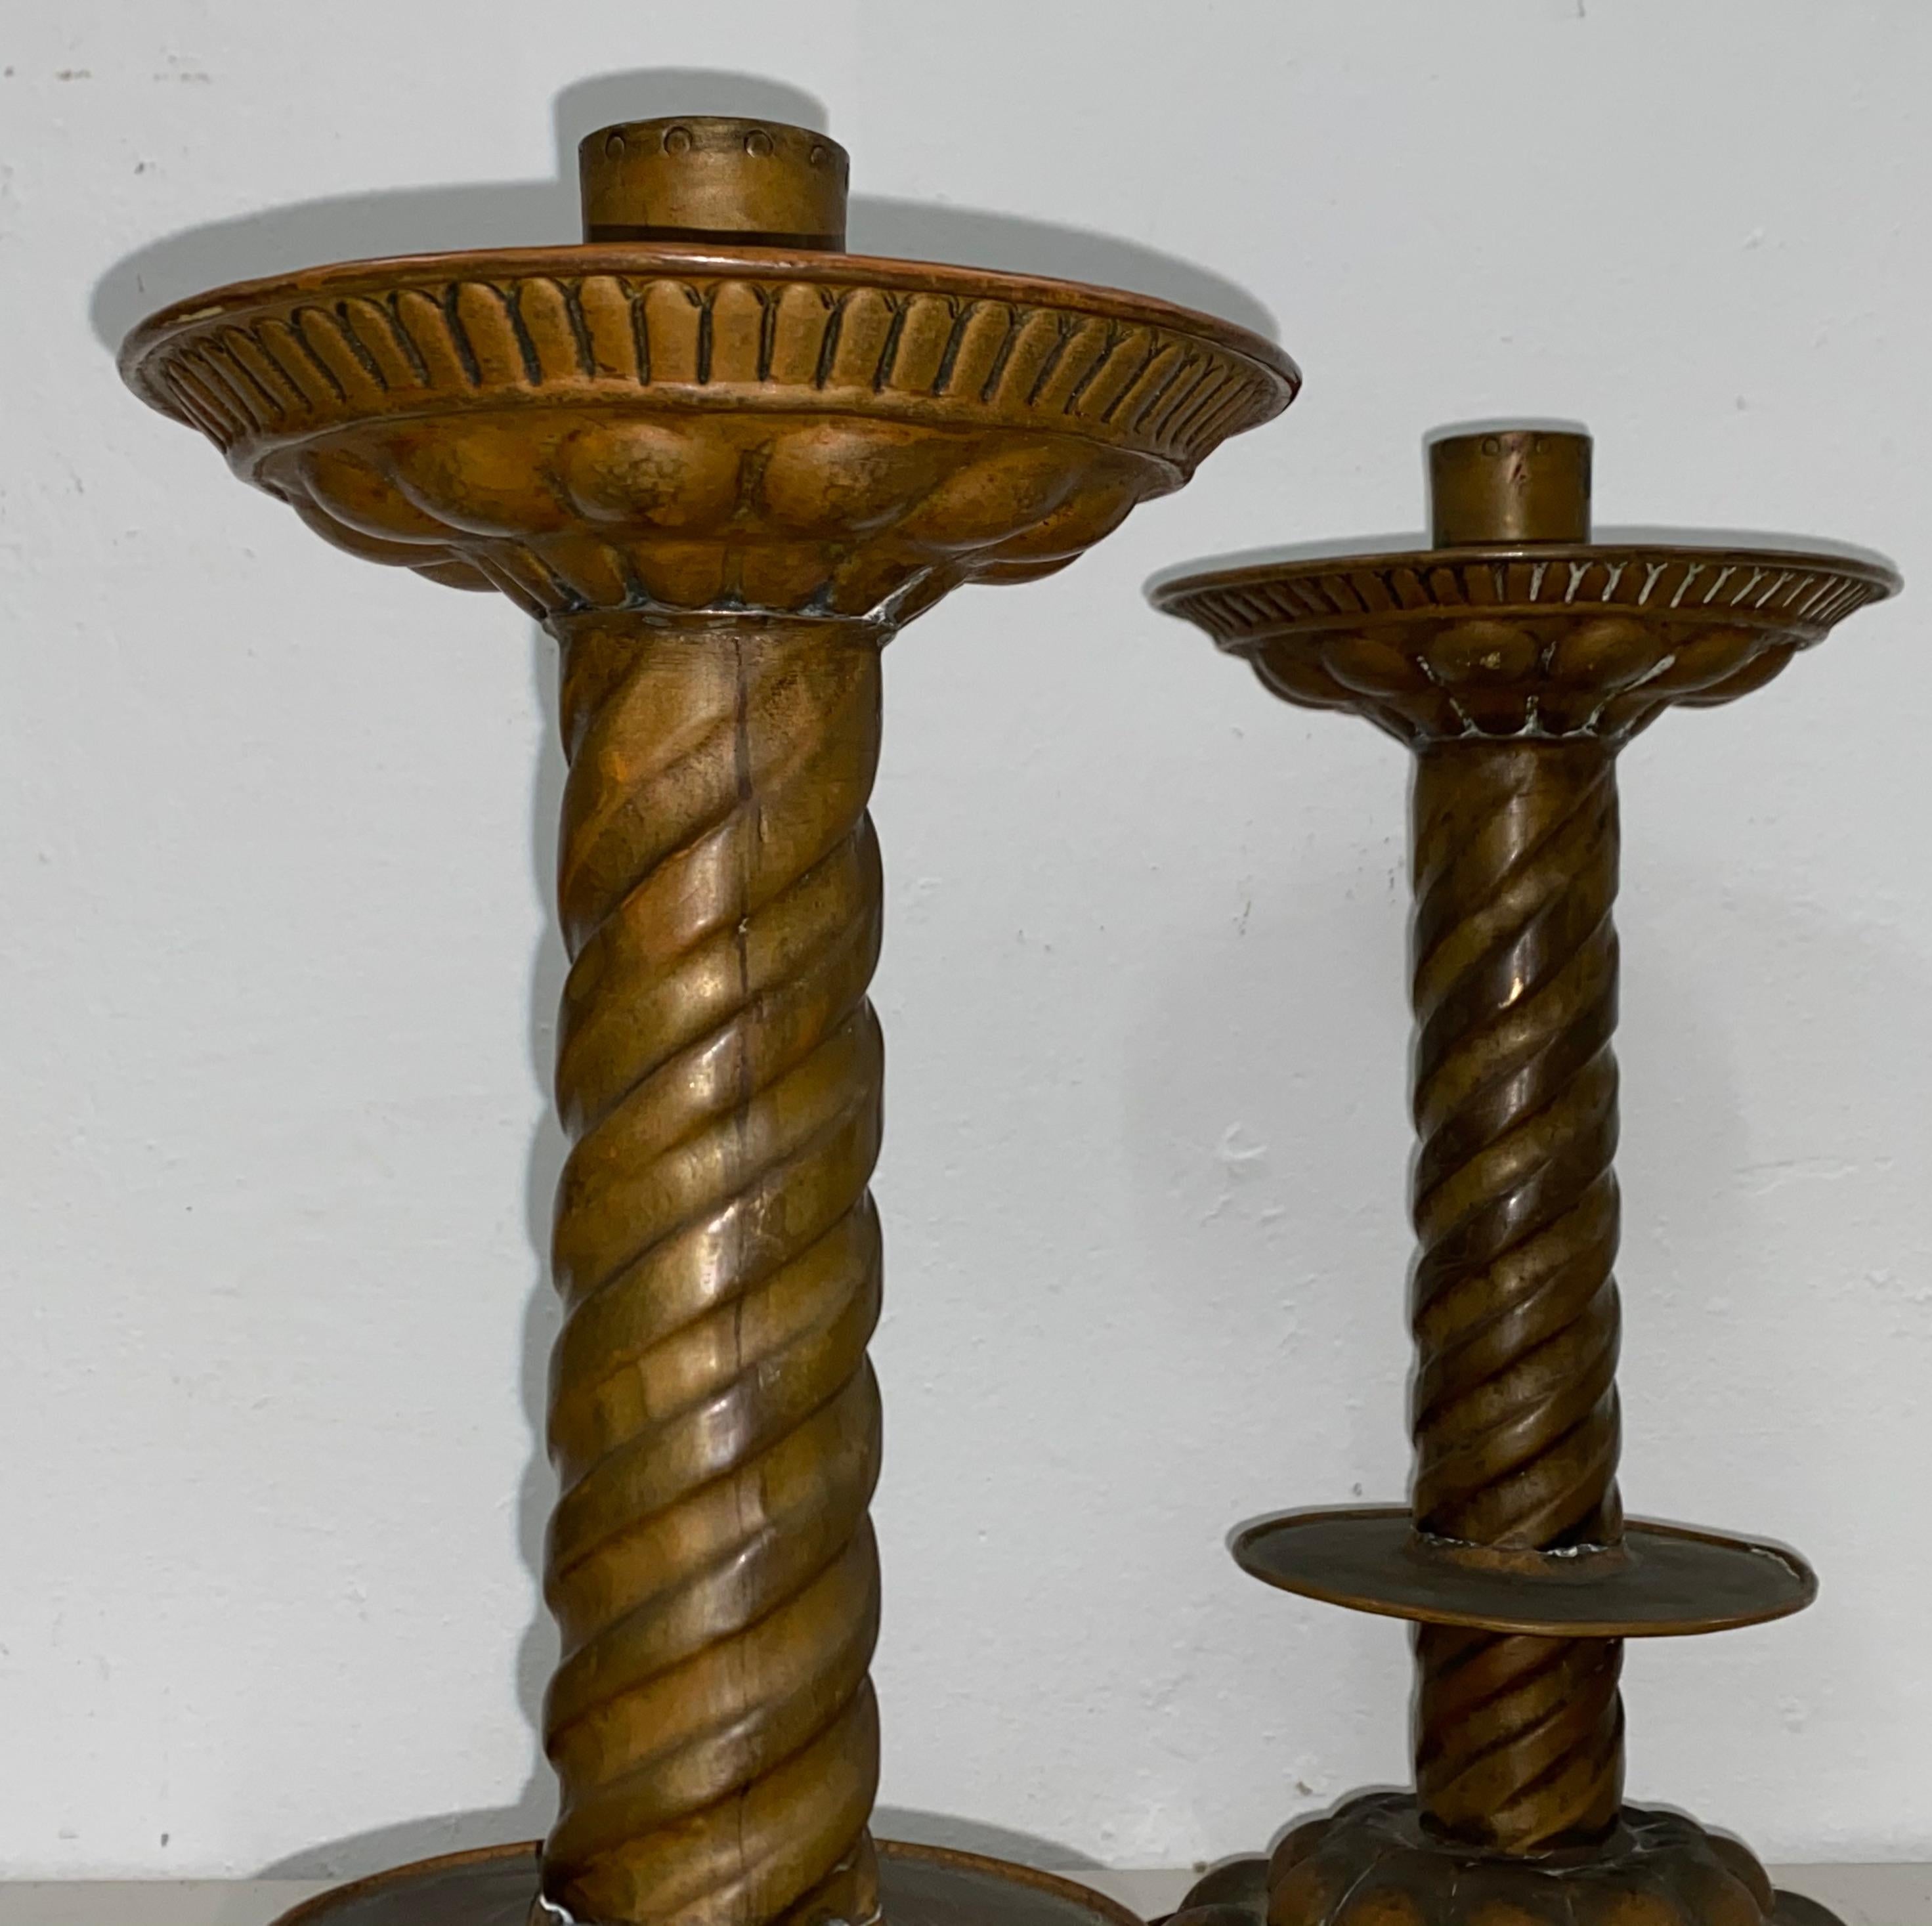 18th to 19th Century Hammered Copper Candle Holders In Good Condition For Sale In San Francisco, CA